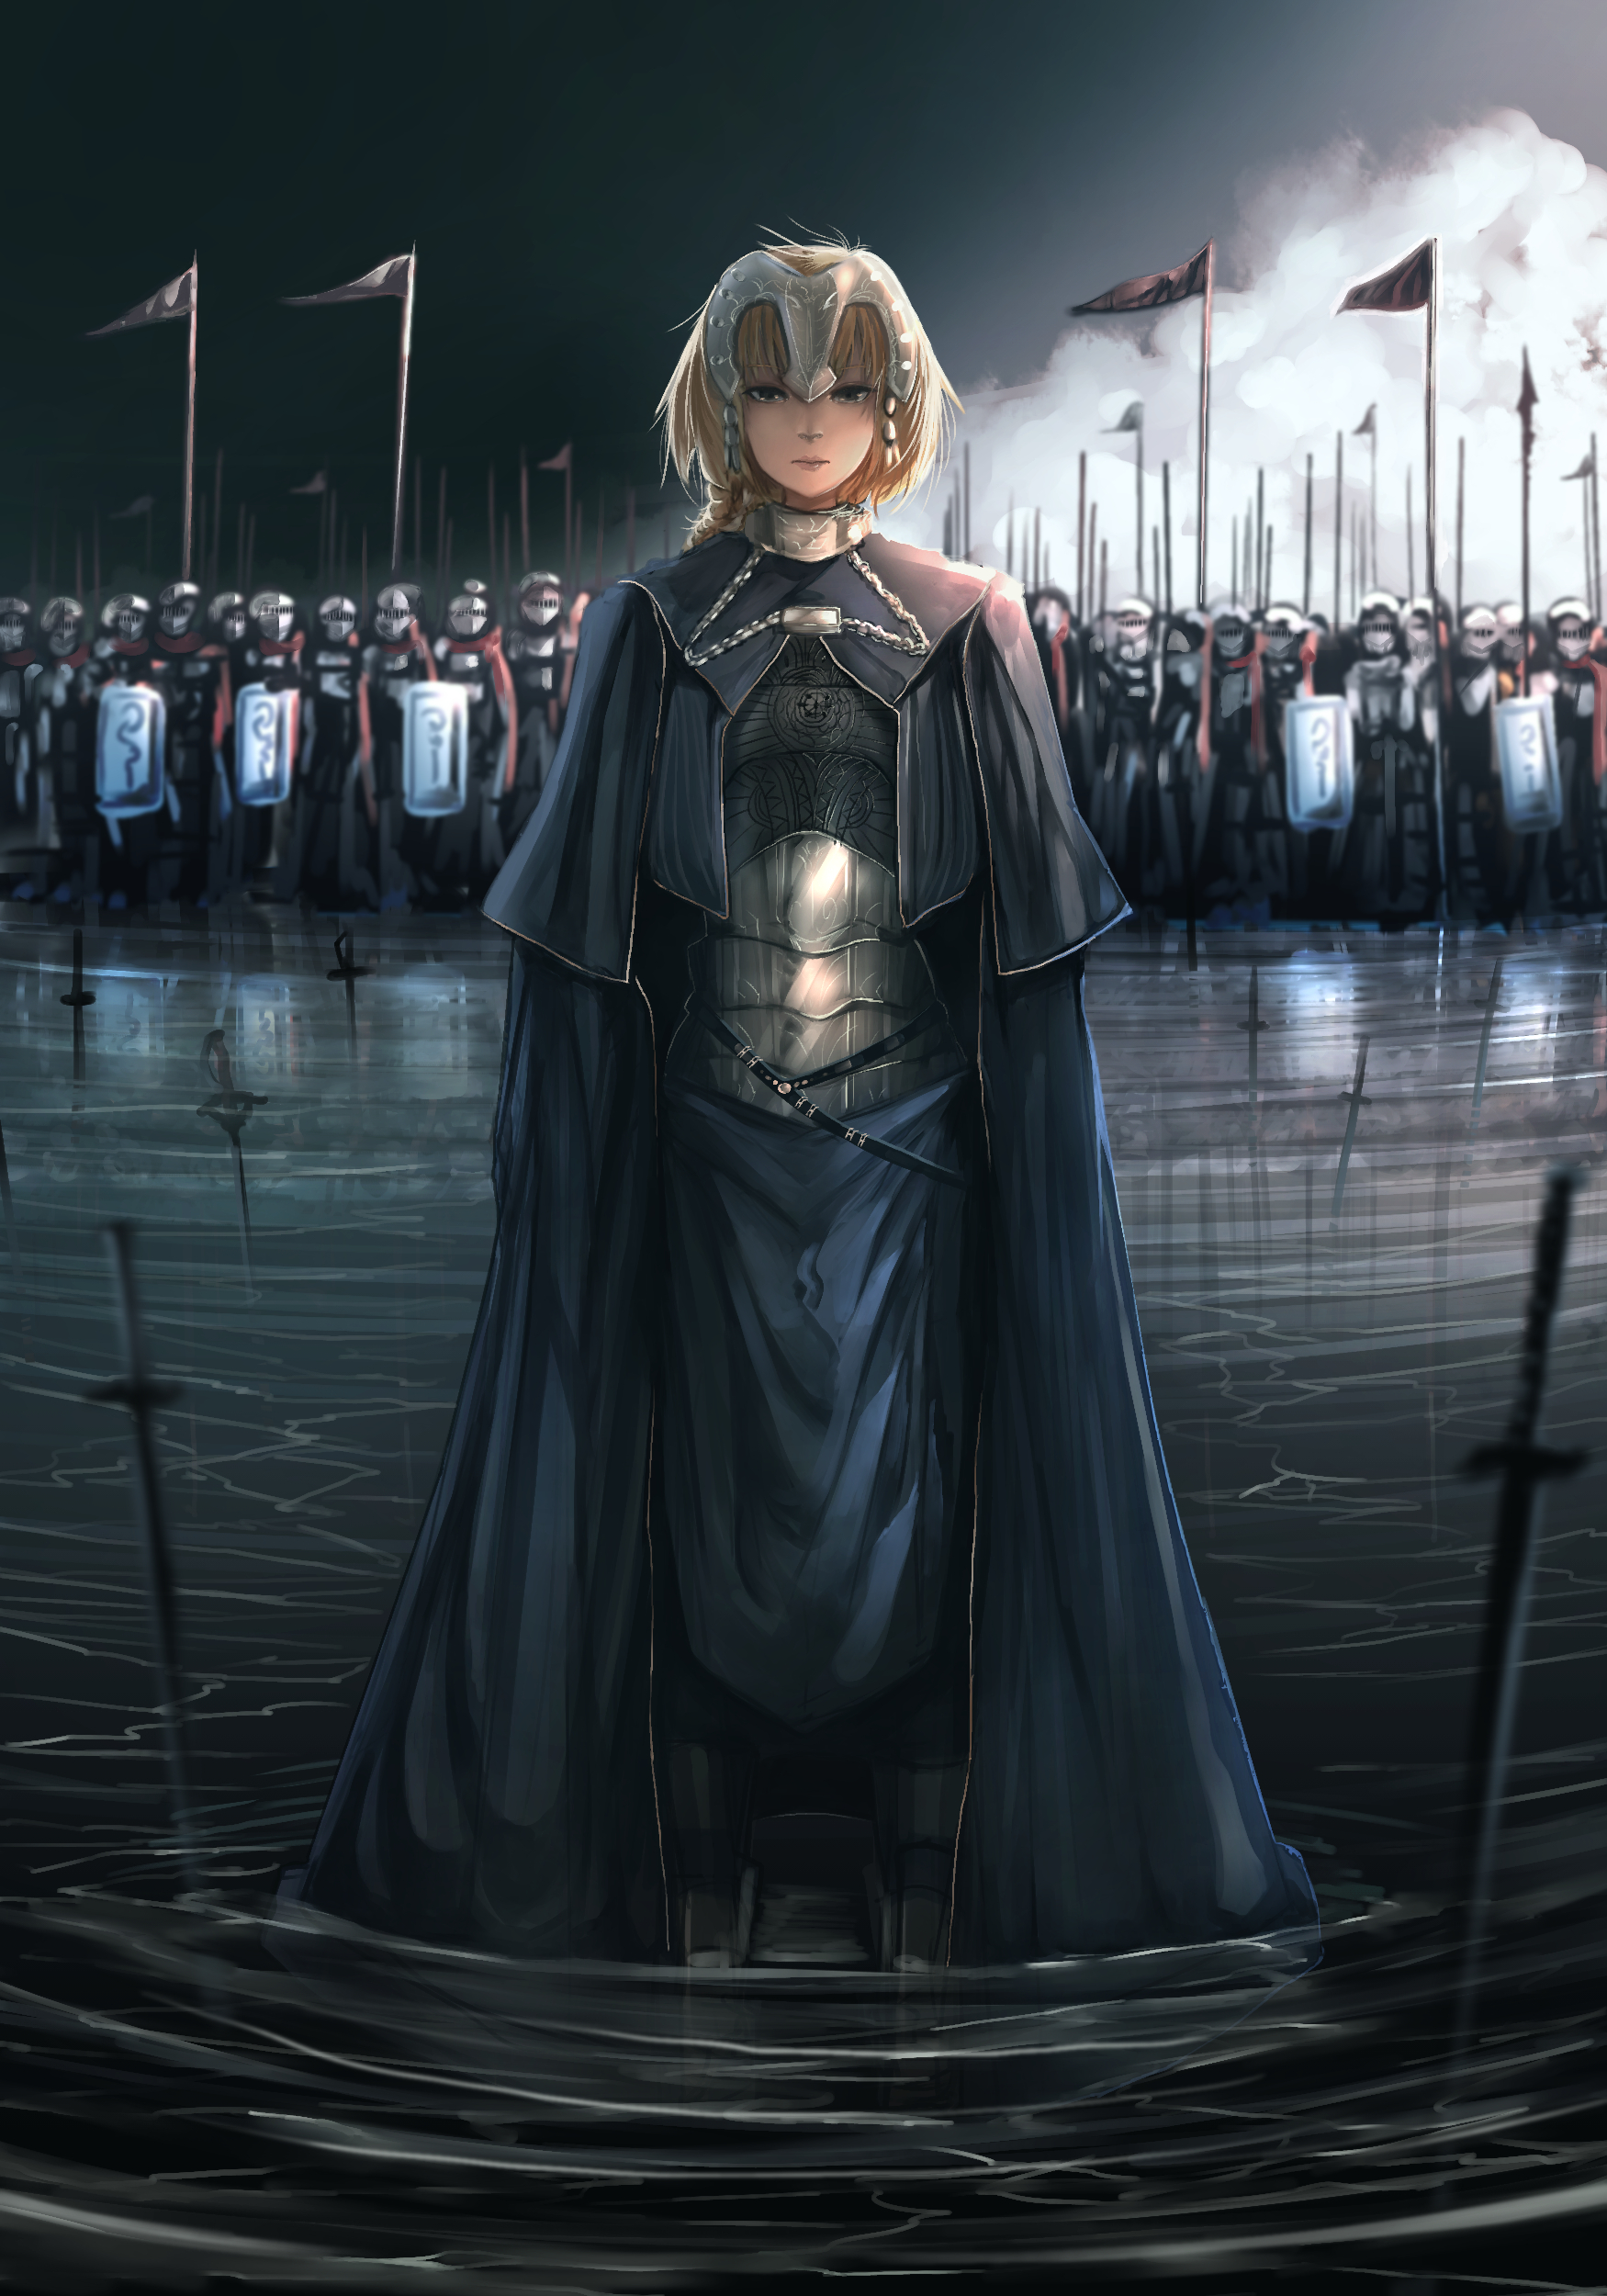 Wallpaper, Fate Series, Fate Apocrypha, anime girls, Ruler Fate Apocrypha, Jeanne d Arc 1750x2500